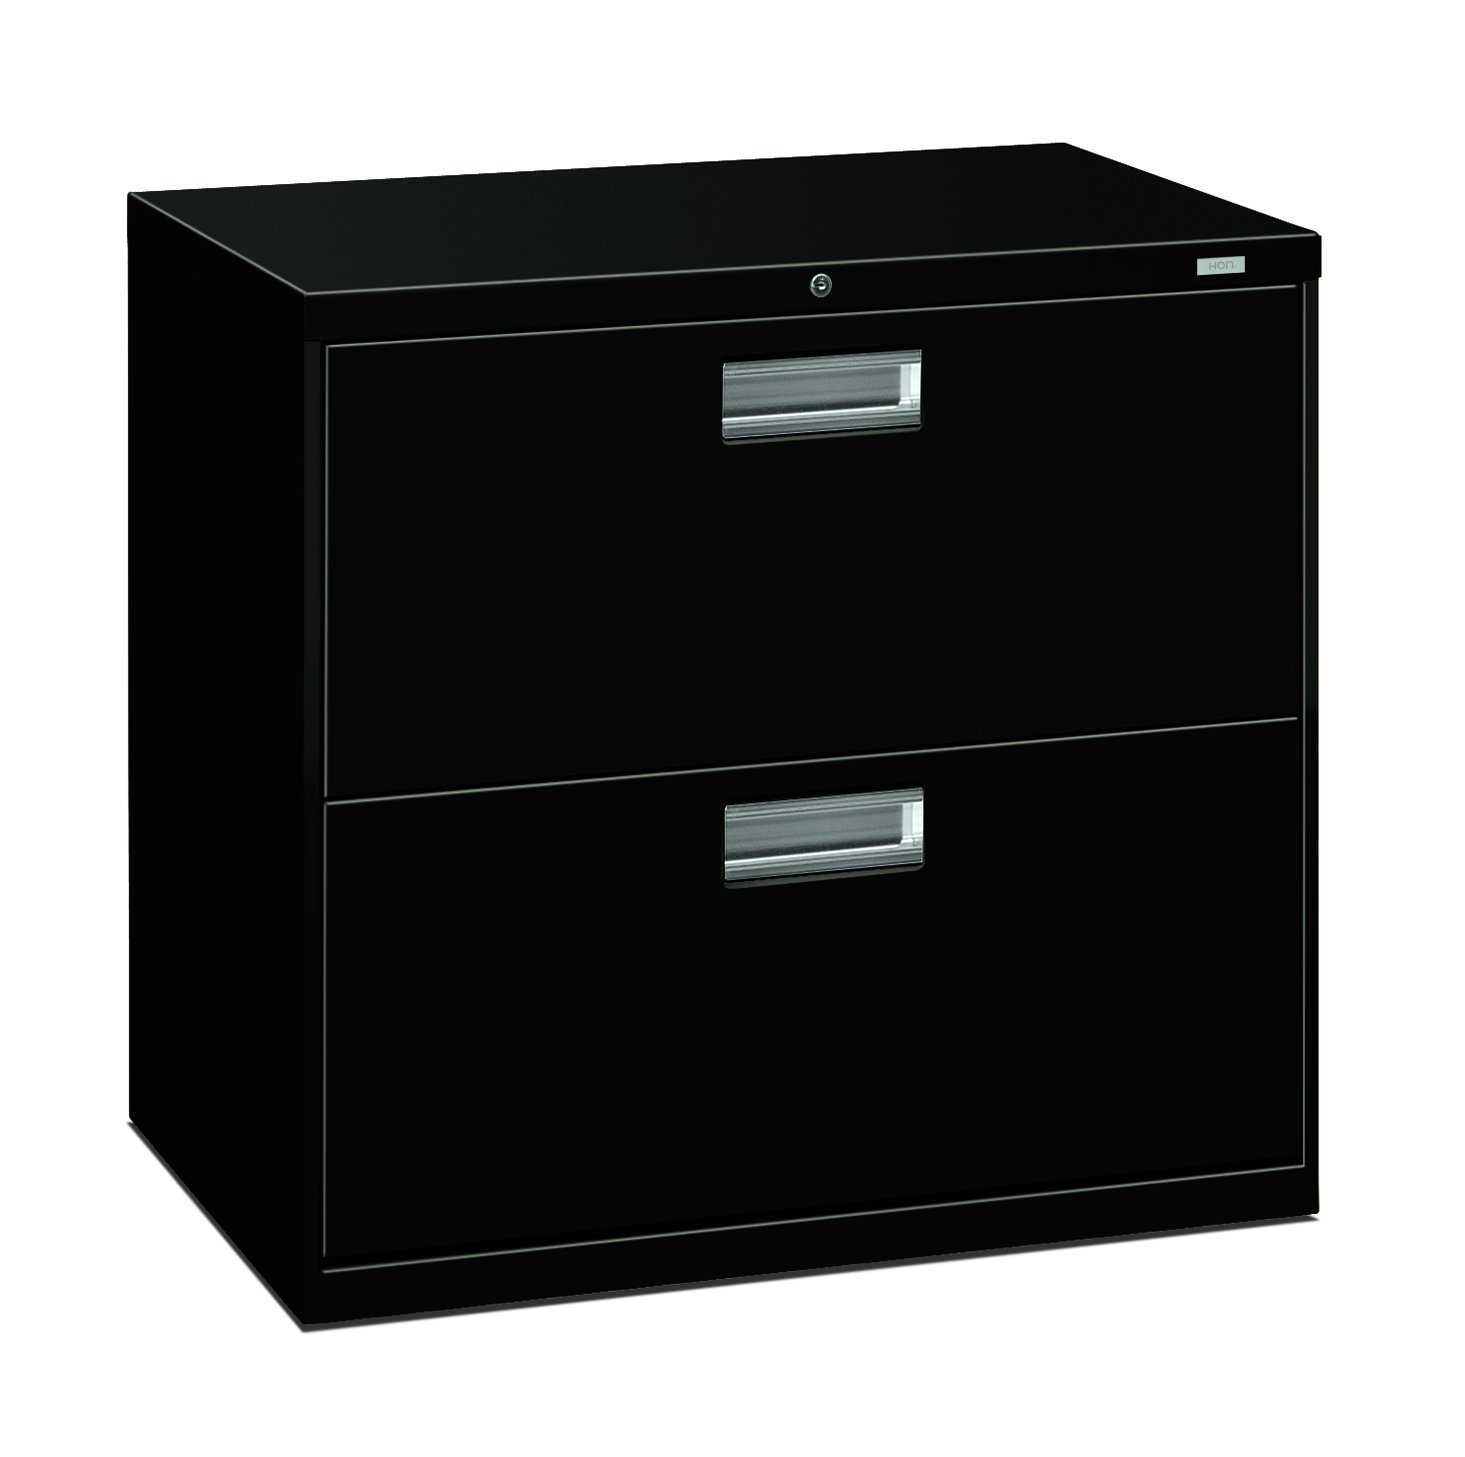 Outstanding Black File Cabinet 2 Drawer Metal Dividers Home Lockable for sizing 1465 X 1457